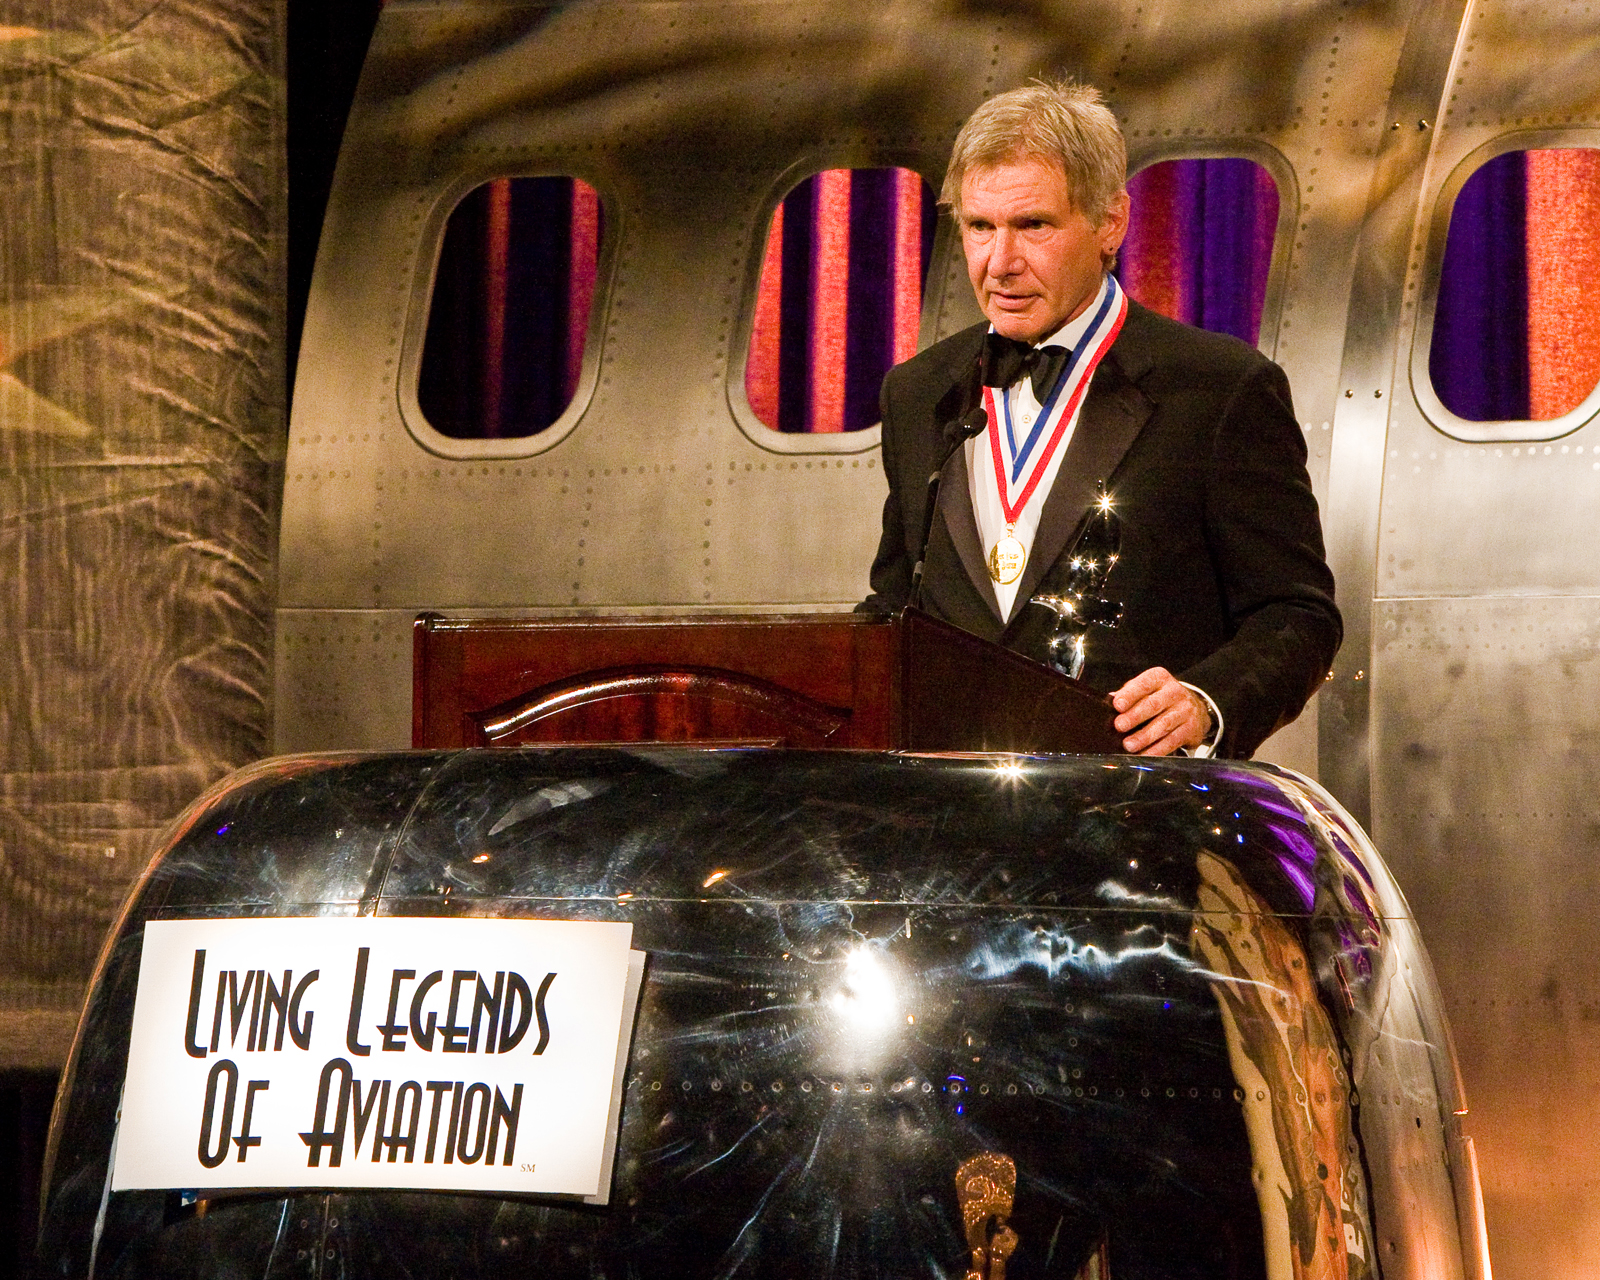 Sixth Annual Living Legends of Aviation Awards